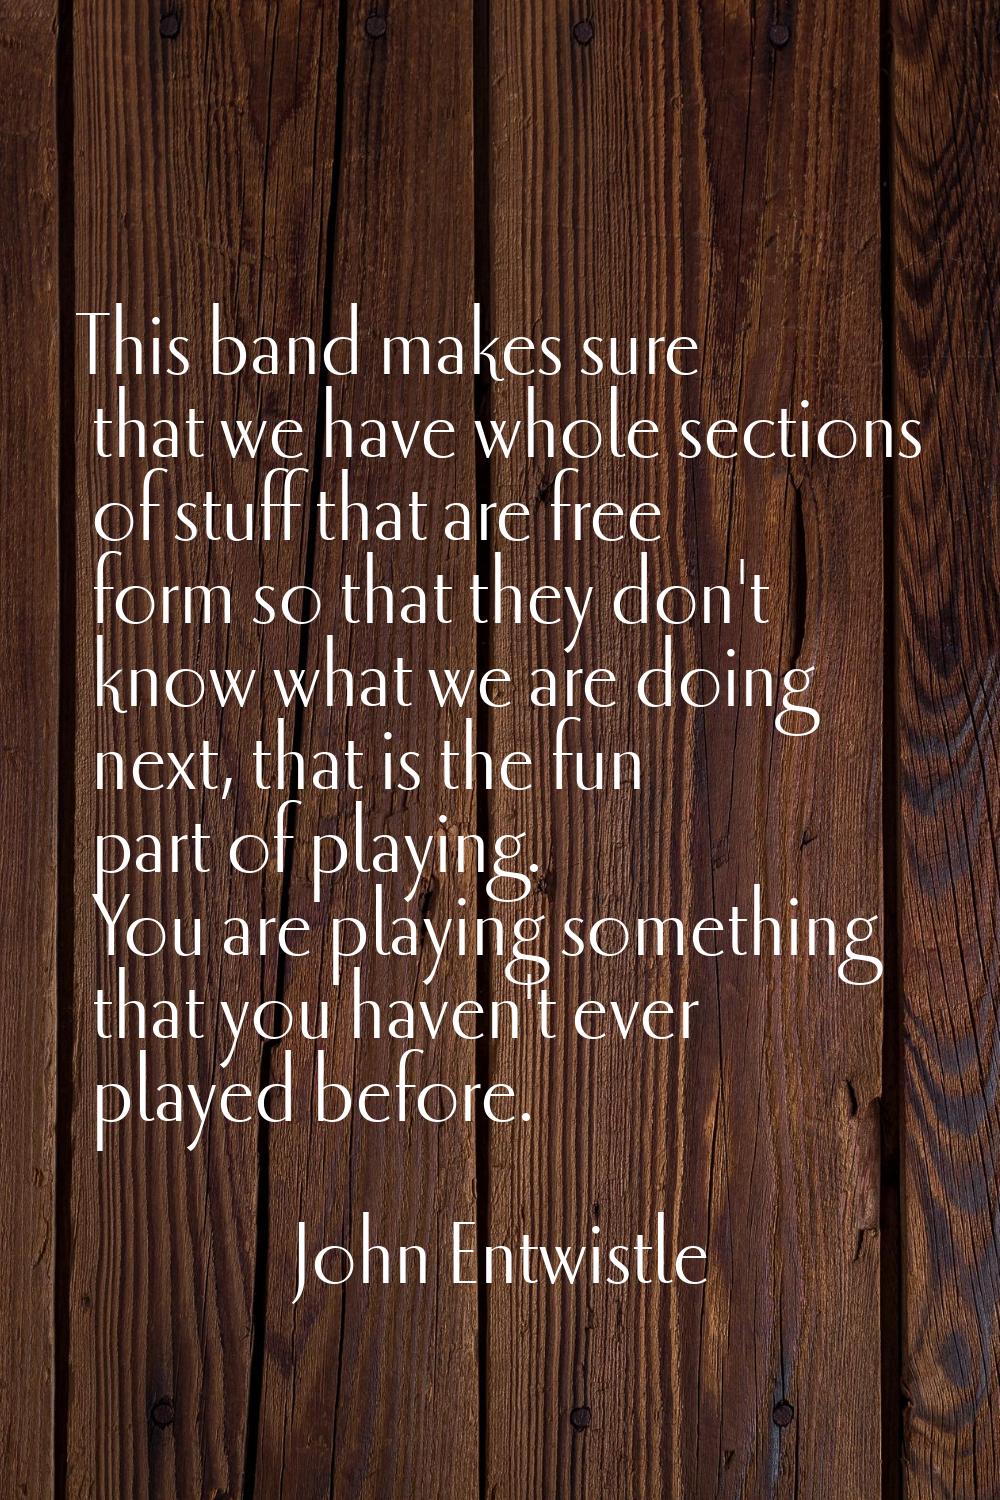 This band makes sure that we have whole sections of stuff that are free form so that they don't kno